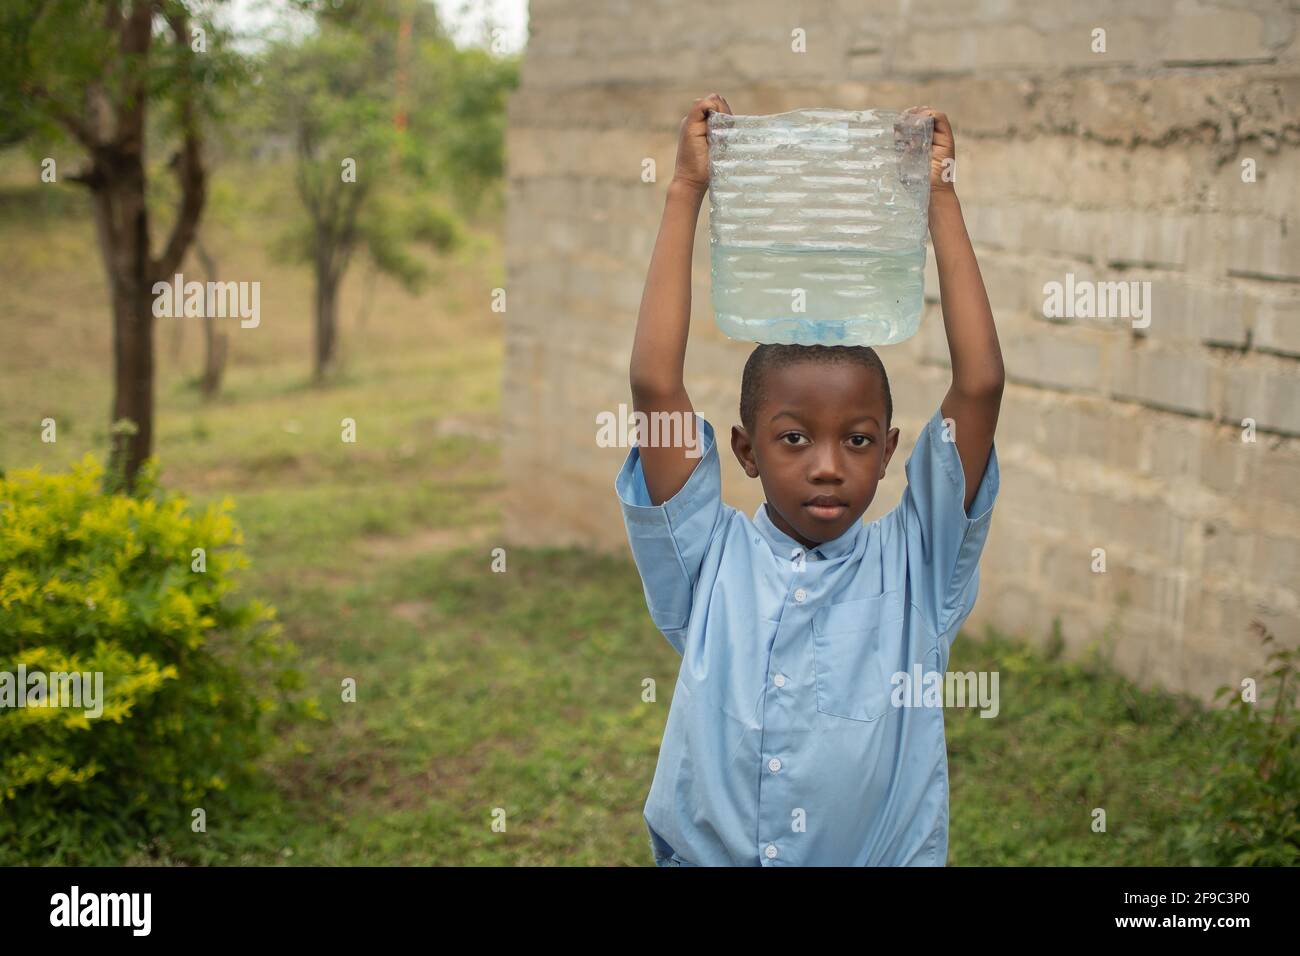 Dodoma, Tanzania. 08-18-2019. Black boy student is working at his rural school fetching drinking water for lunch. Stock Photo